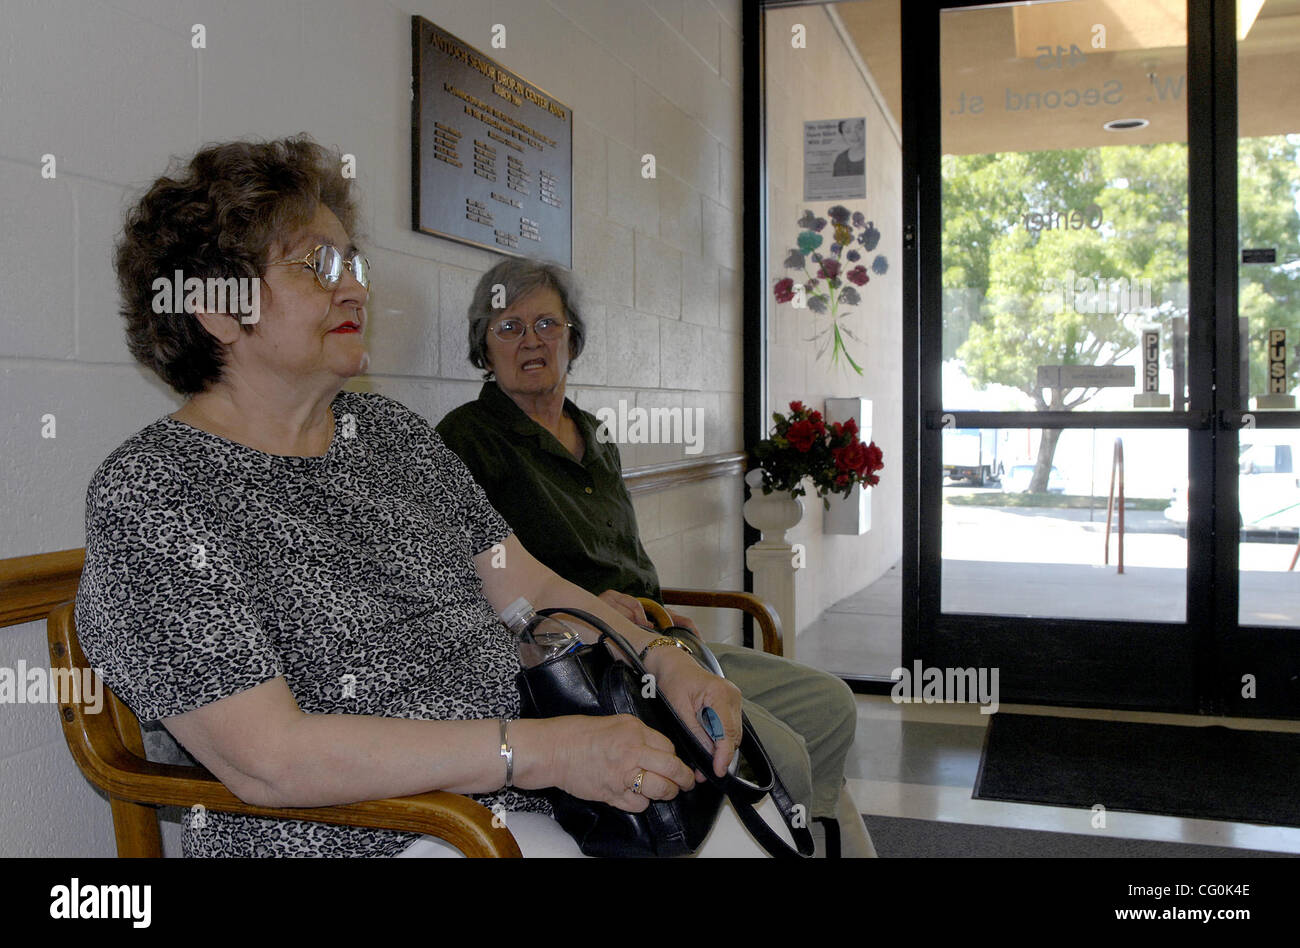 While waiting for the Dial-A-Ride bus to take them home, Angela Blanca, left, and Wanda Grady, both of Oakley, Calif., stay out of the oppressive heat and keep cool in the lobby at the Senior Center in Antioch, Calif., on Thursday, July 5, 2007. The Senior Center is an official Cooling Center. (Eddi Stock Photo